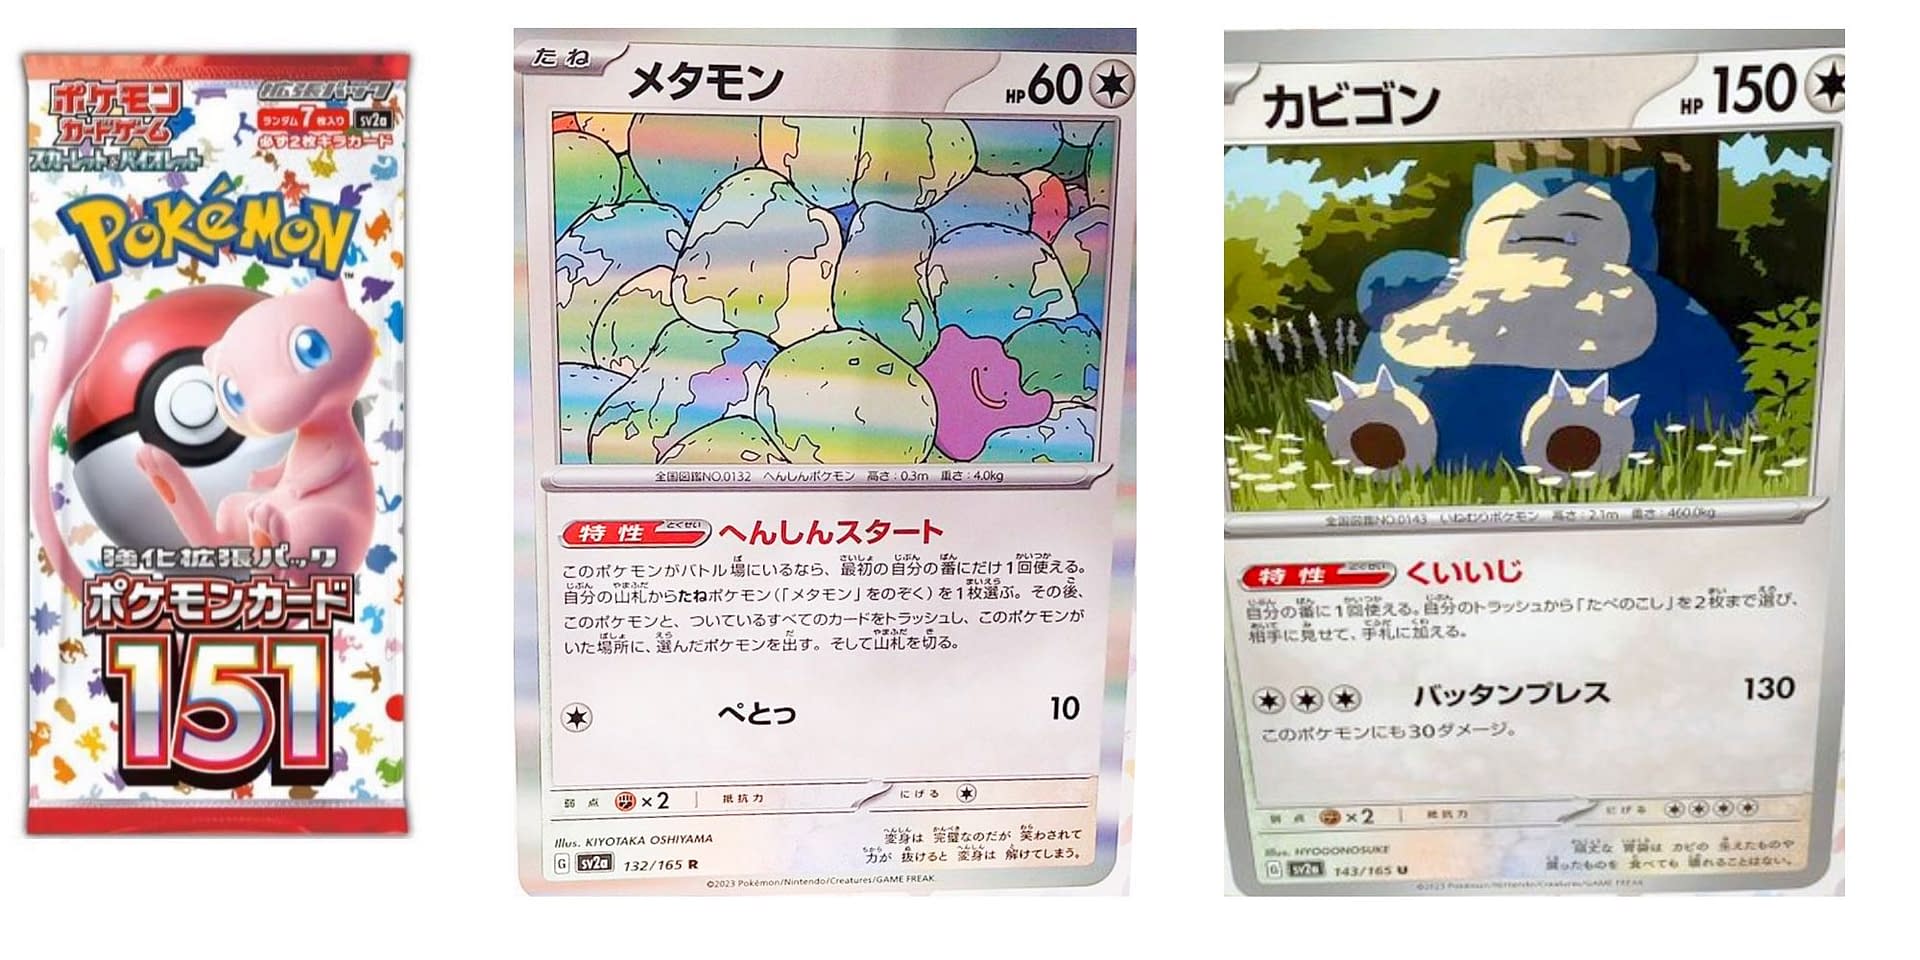 Are the Pokémon 151 numbered pages available? : r/PokemonTCG